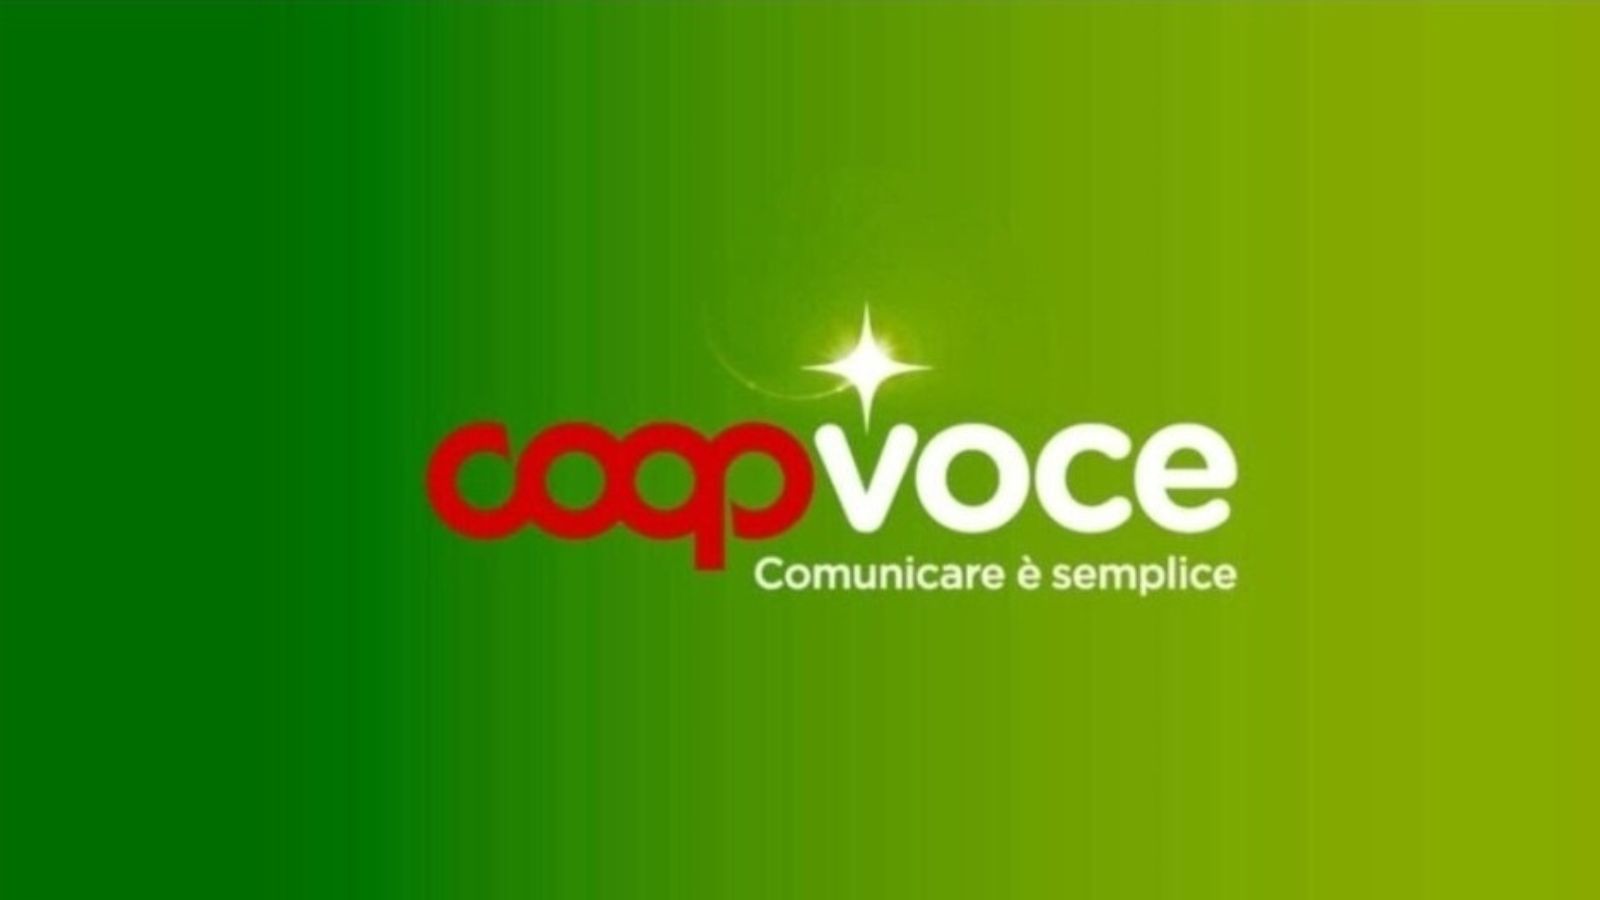 CoopVoce Evo Voce SMS Special offerta 